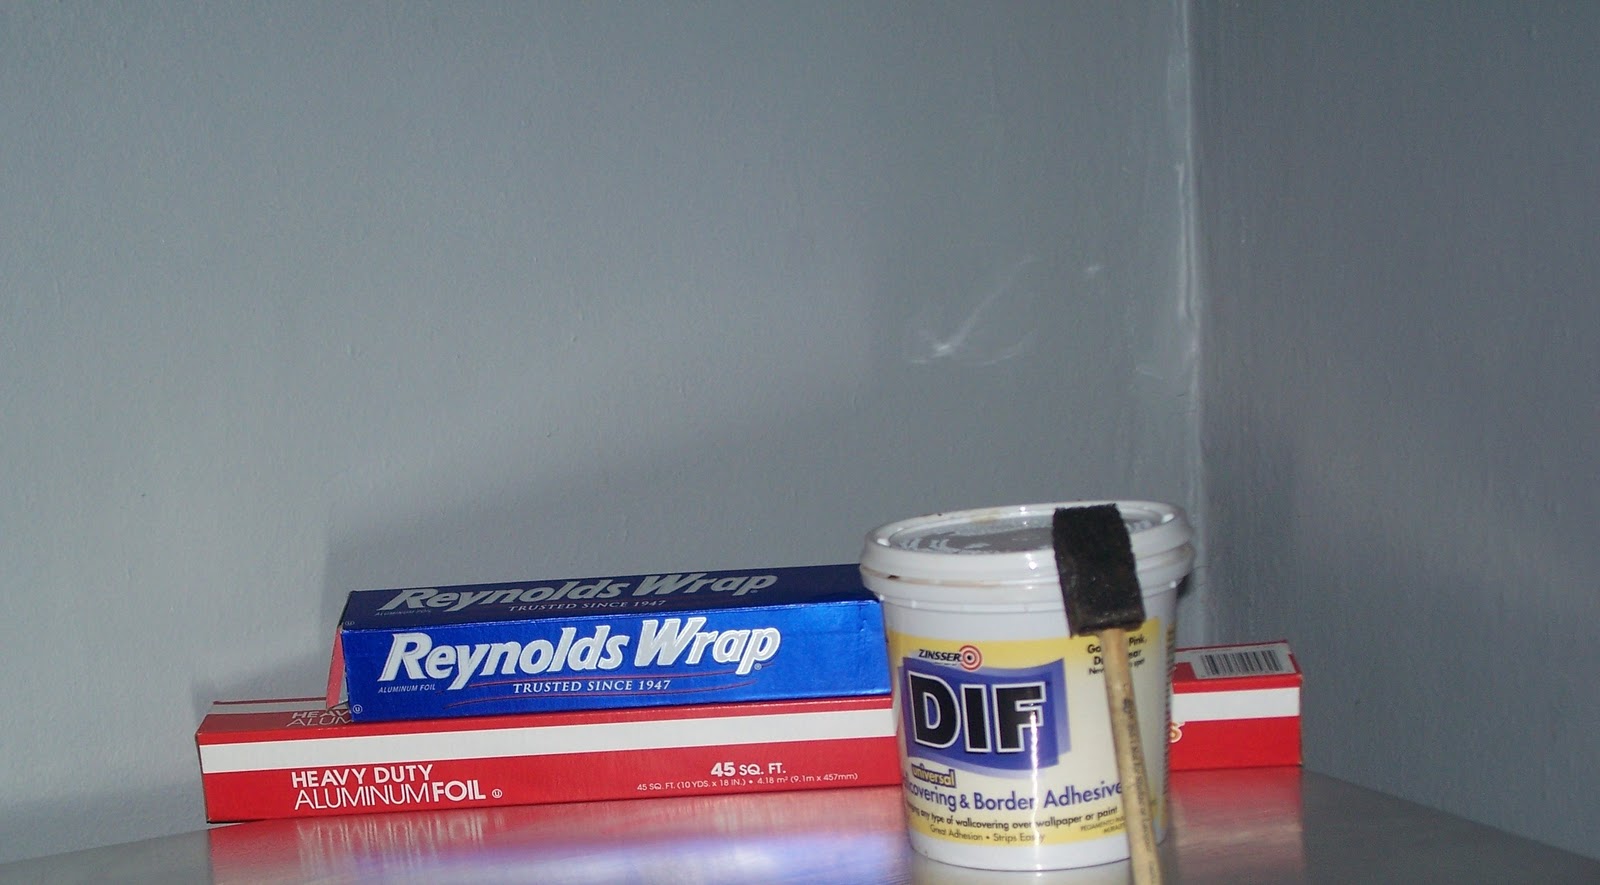 My Decor Education: Basic tools for most DIY decor painting projects